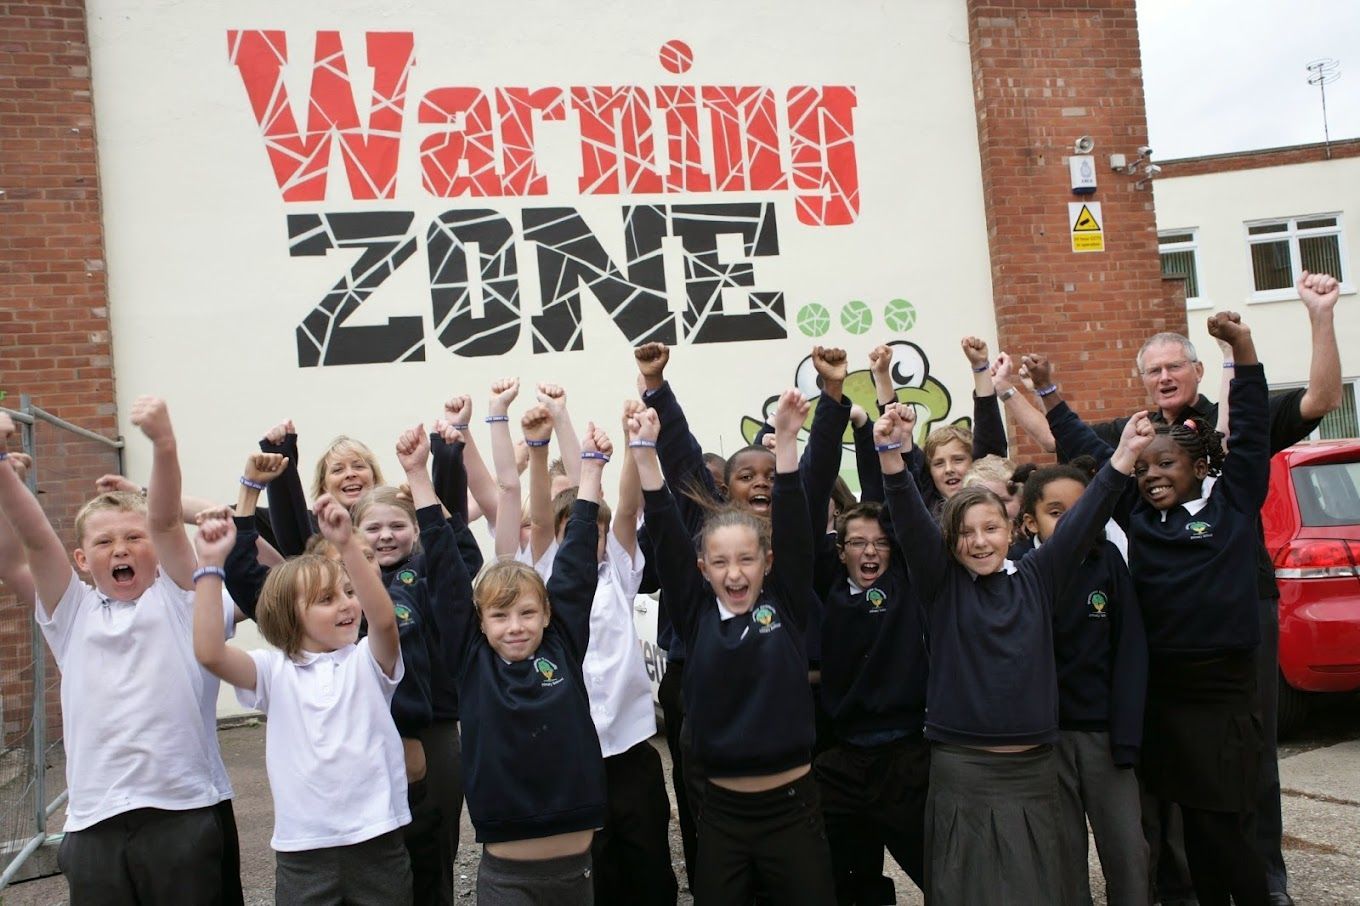 The Randal Charitable Foundation proudly supports Warning Zone.